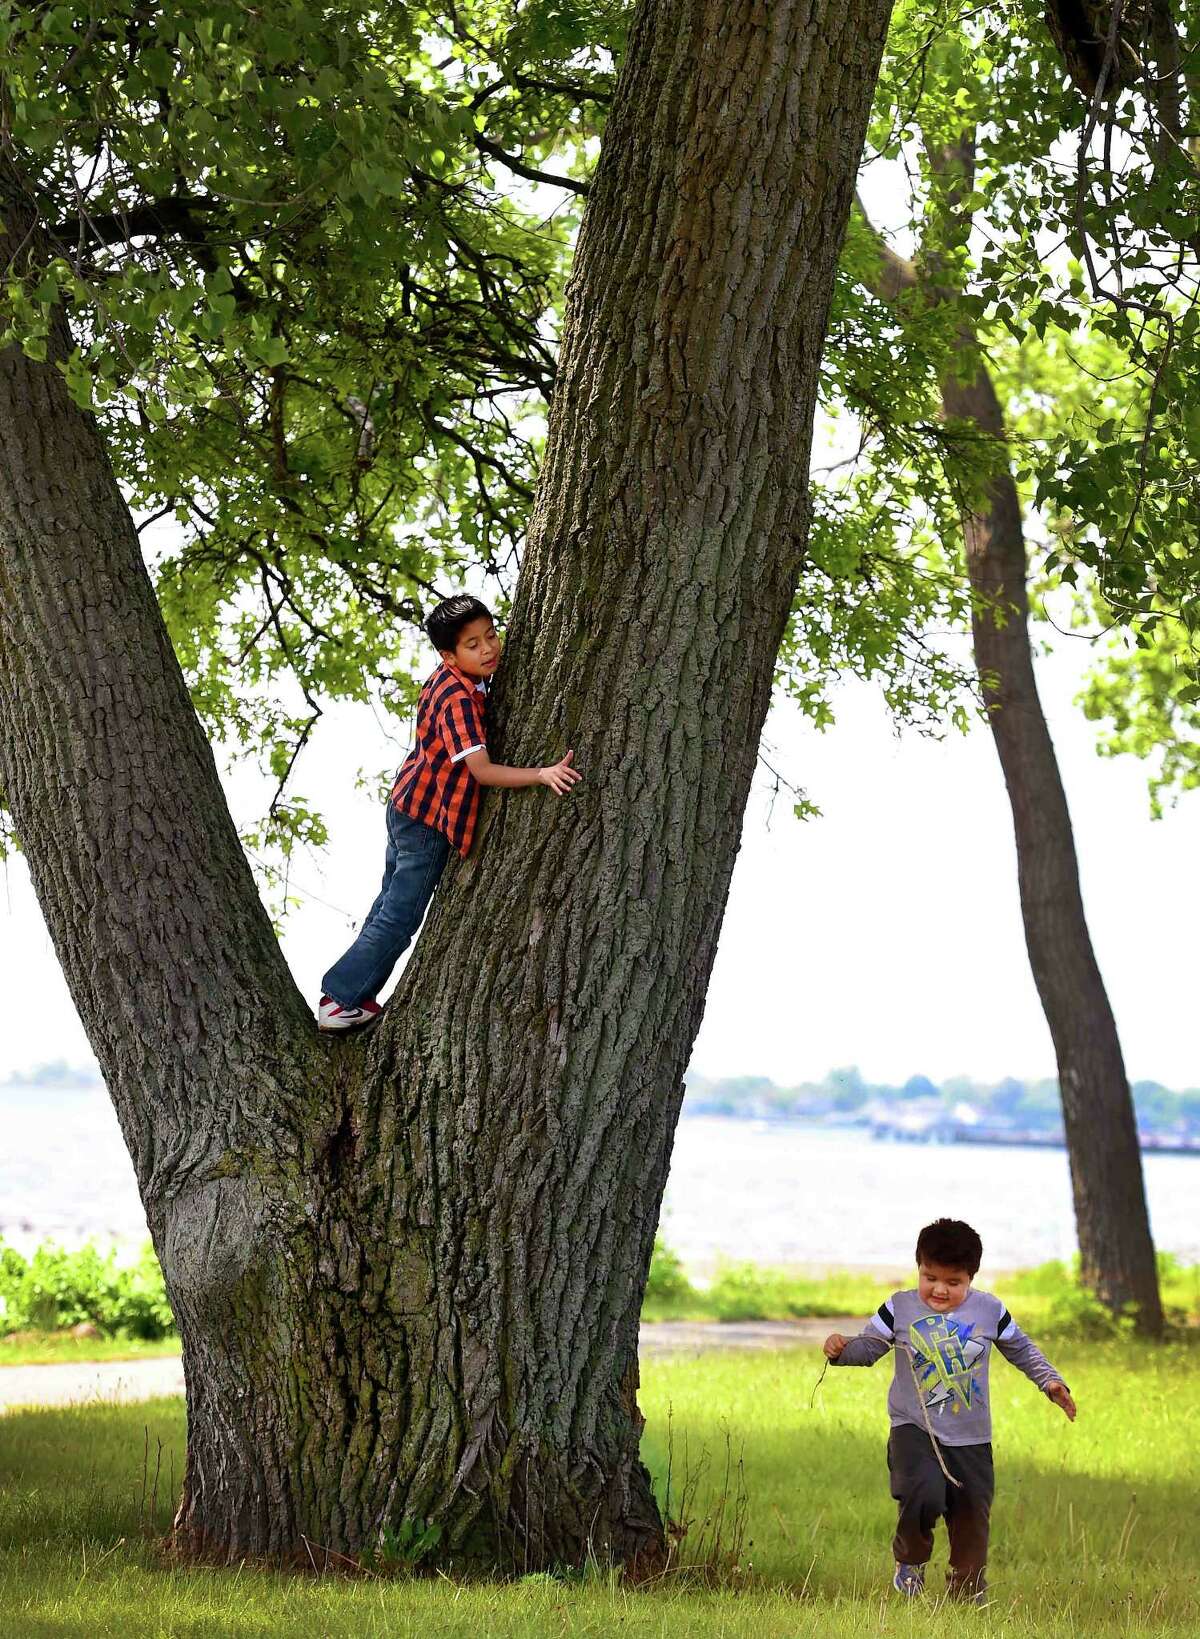 (Peter Hvizdak - New Haven Register) Anthony MIranda, 8, left in tree, and his brother David Miranda, 4, both of Shelton, explore Veterans' Memorial Park on Long Wharf Drive in New Haven during a visit there Tuesday, May 25, 2016 by their family to enjoy the shoreline view of New Haven Harbor. e